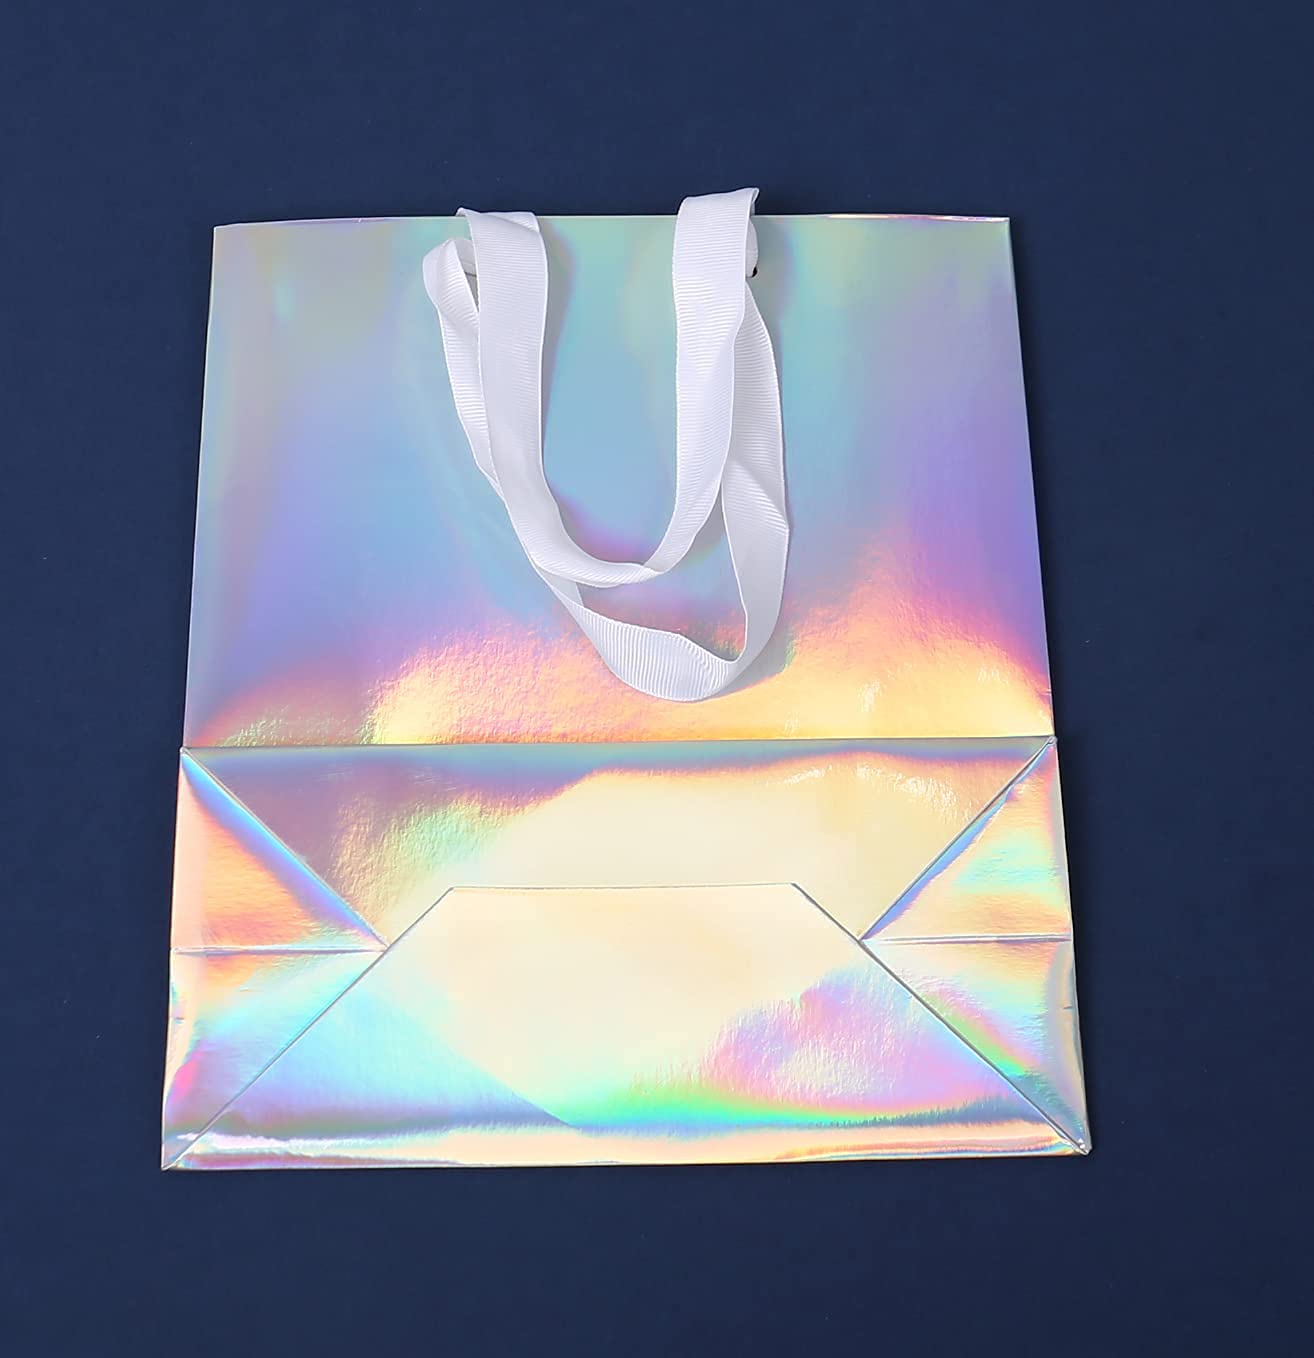 Lidelazon Iridescent Party Bags with Handles (12 Pack) Holographic Silver Foil Gift Bags, Treat Bags, Favor Bags, Party Favors, Favor Gifts for Guests, Thank You Bags, Welcome Bag